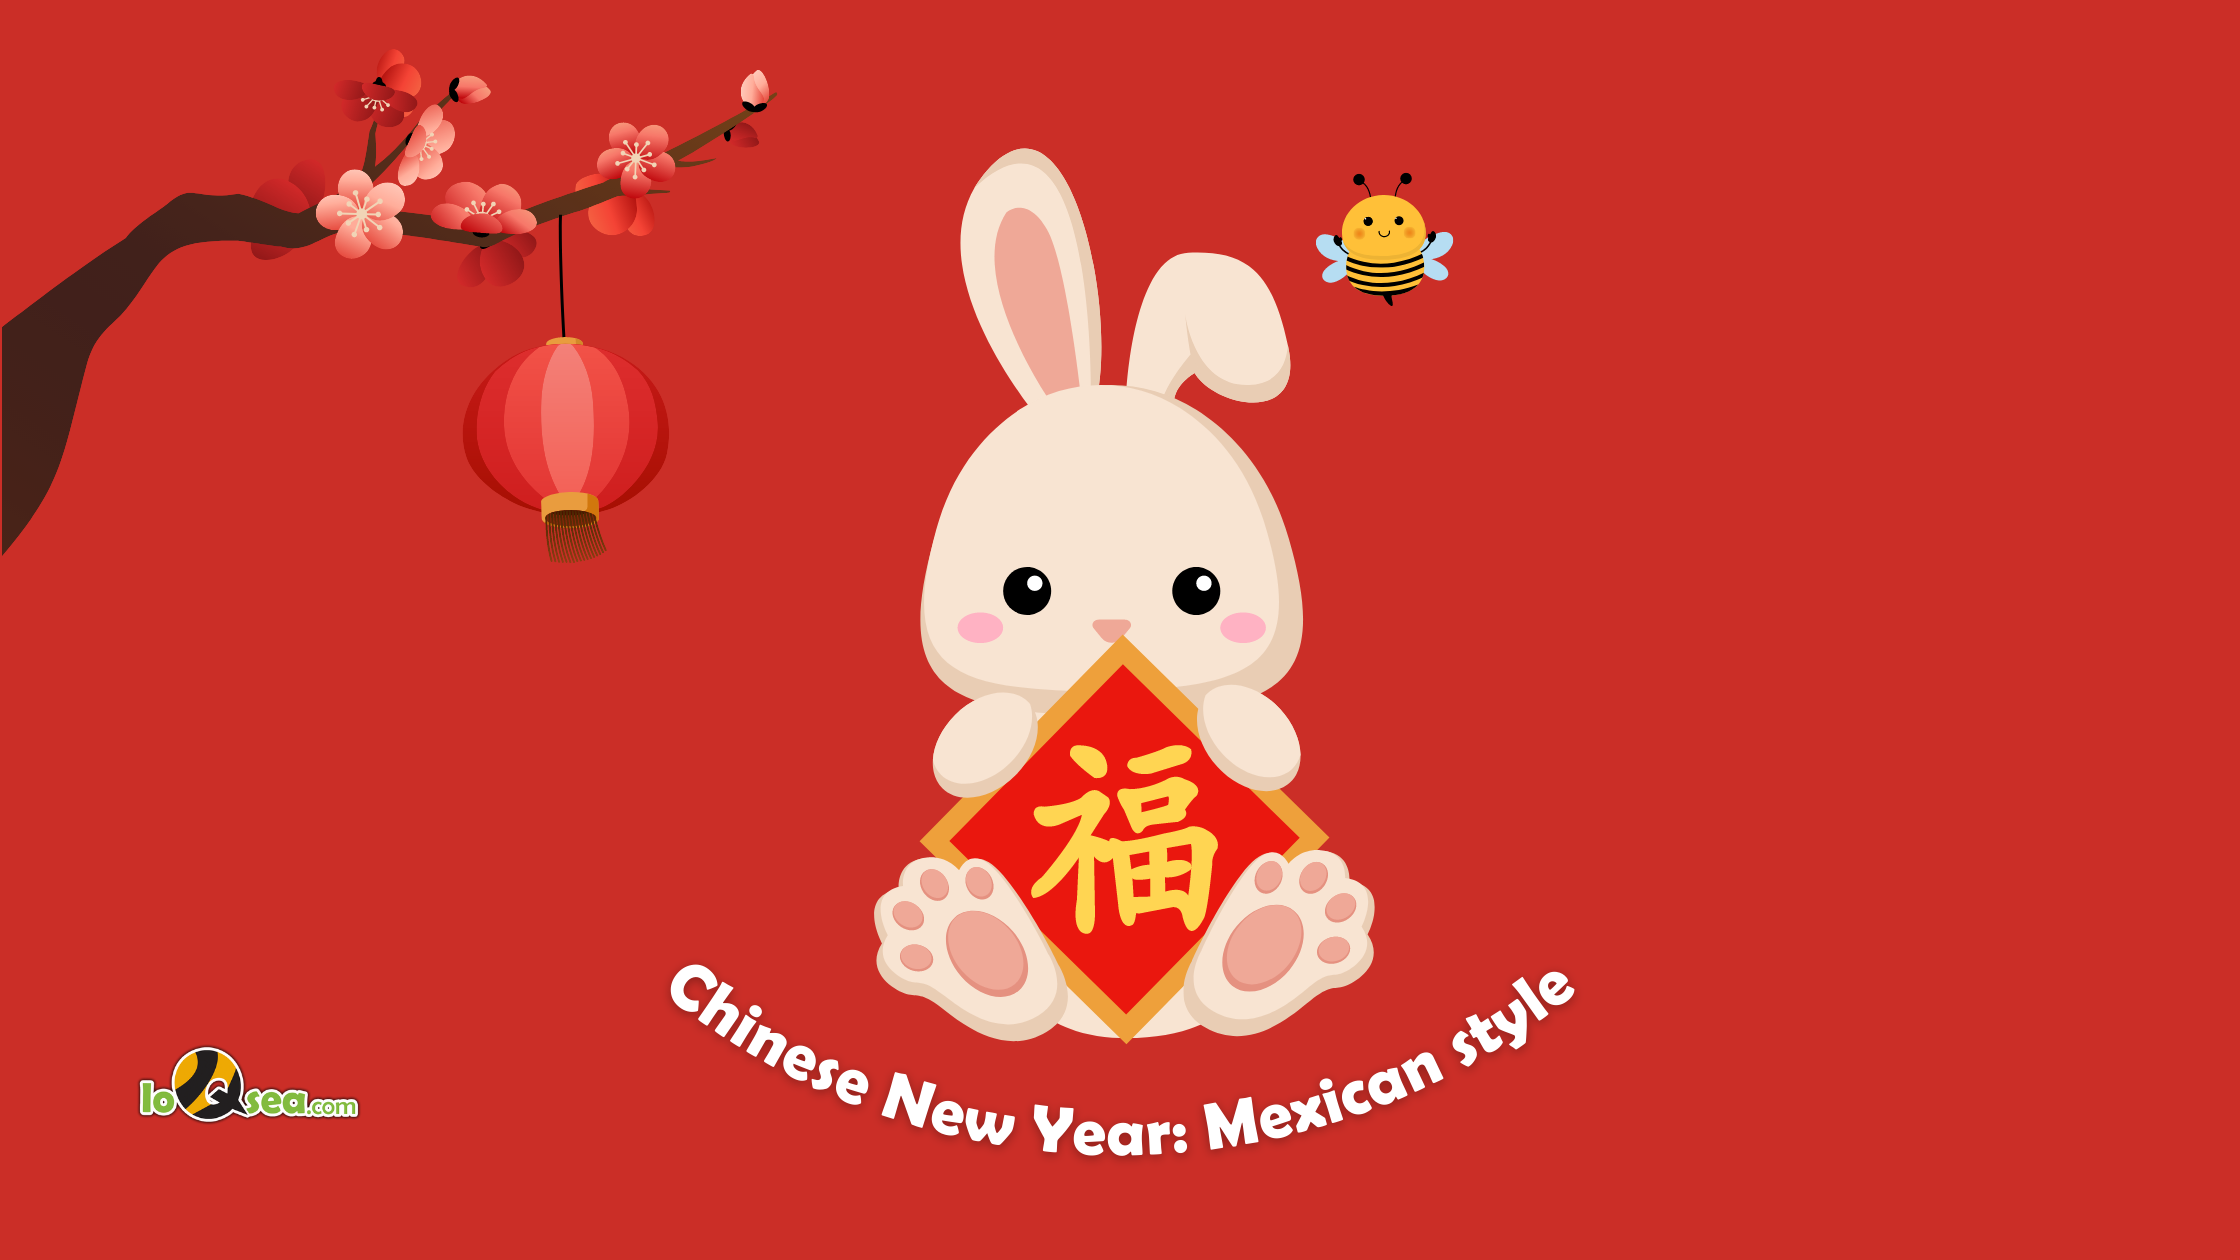 Chinese New Year: Celebrating the Year of the Rabbit